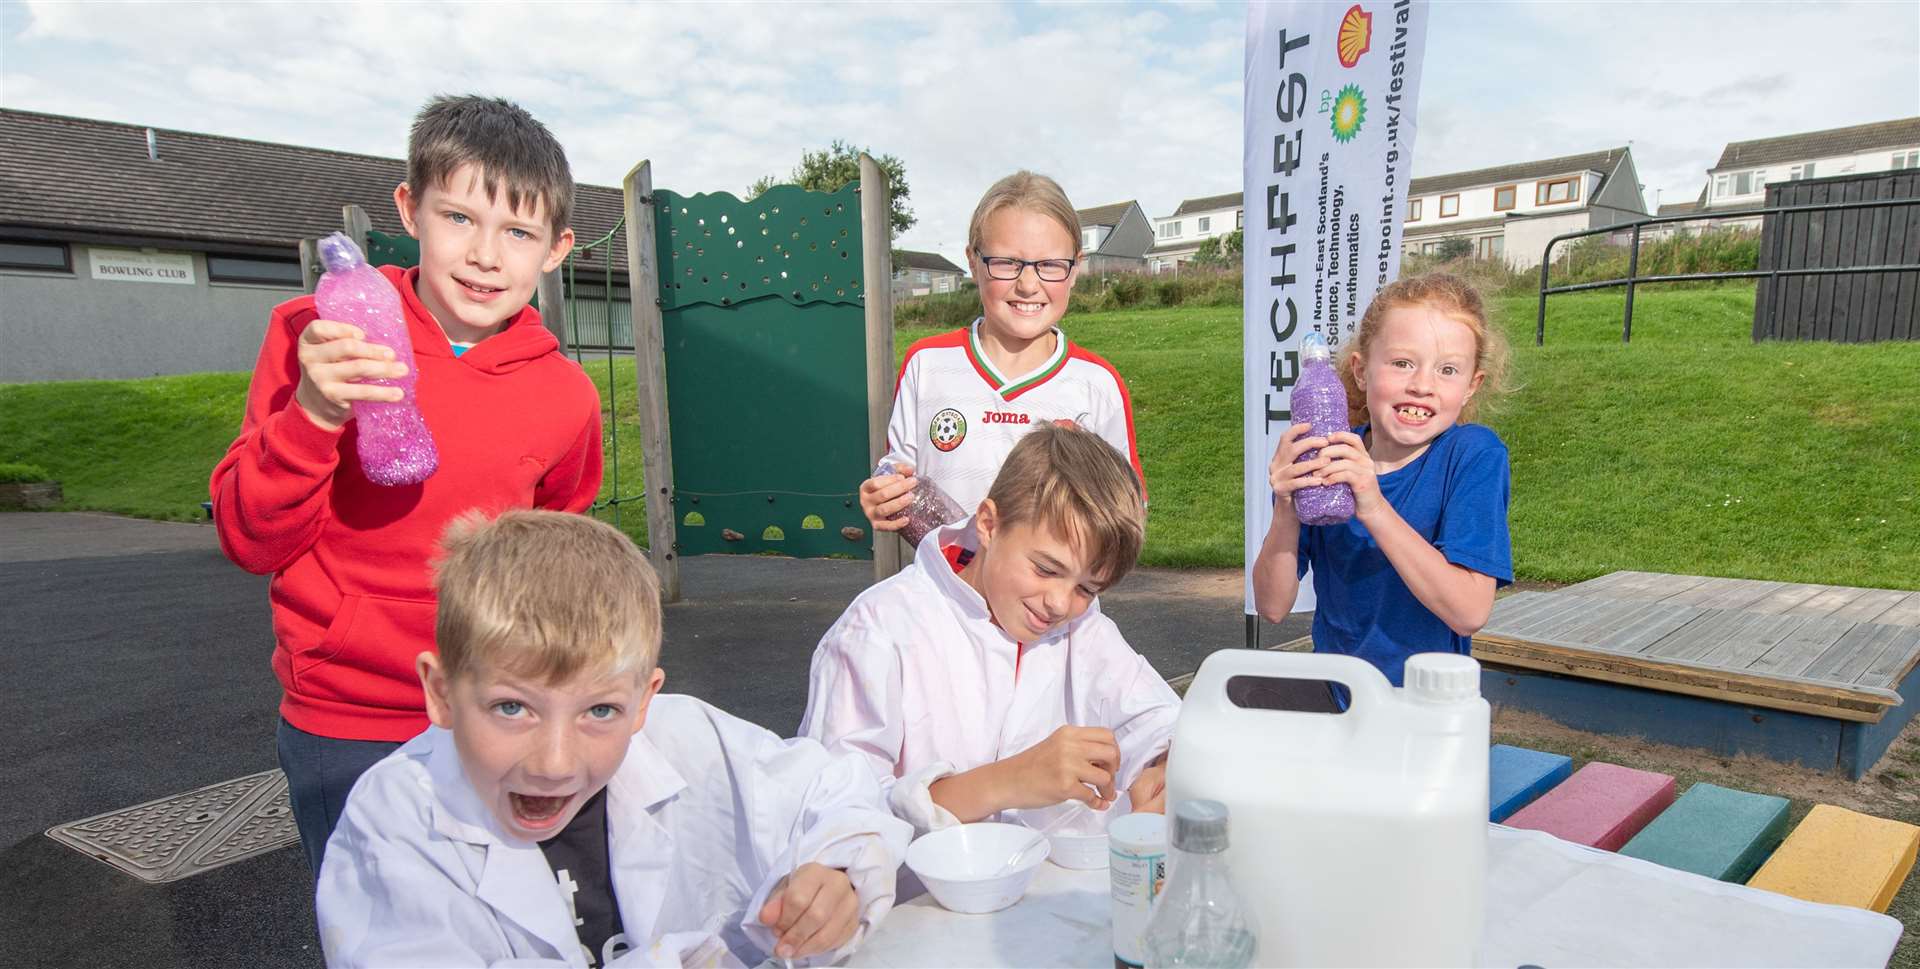 TechFest involves children from across the north-east getting involved with activities.